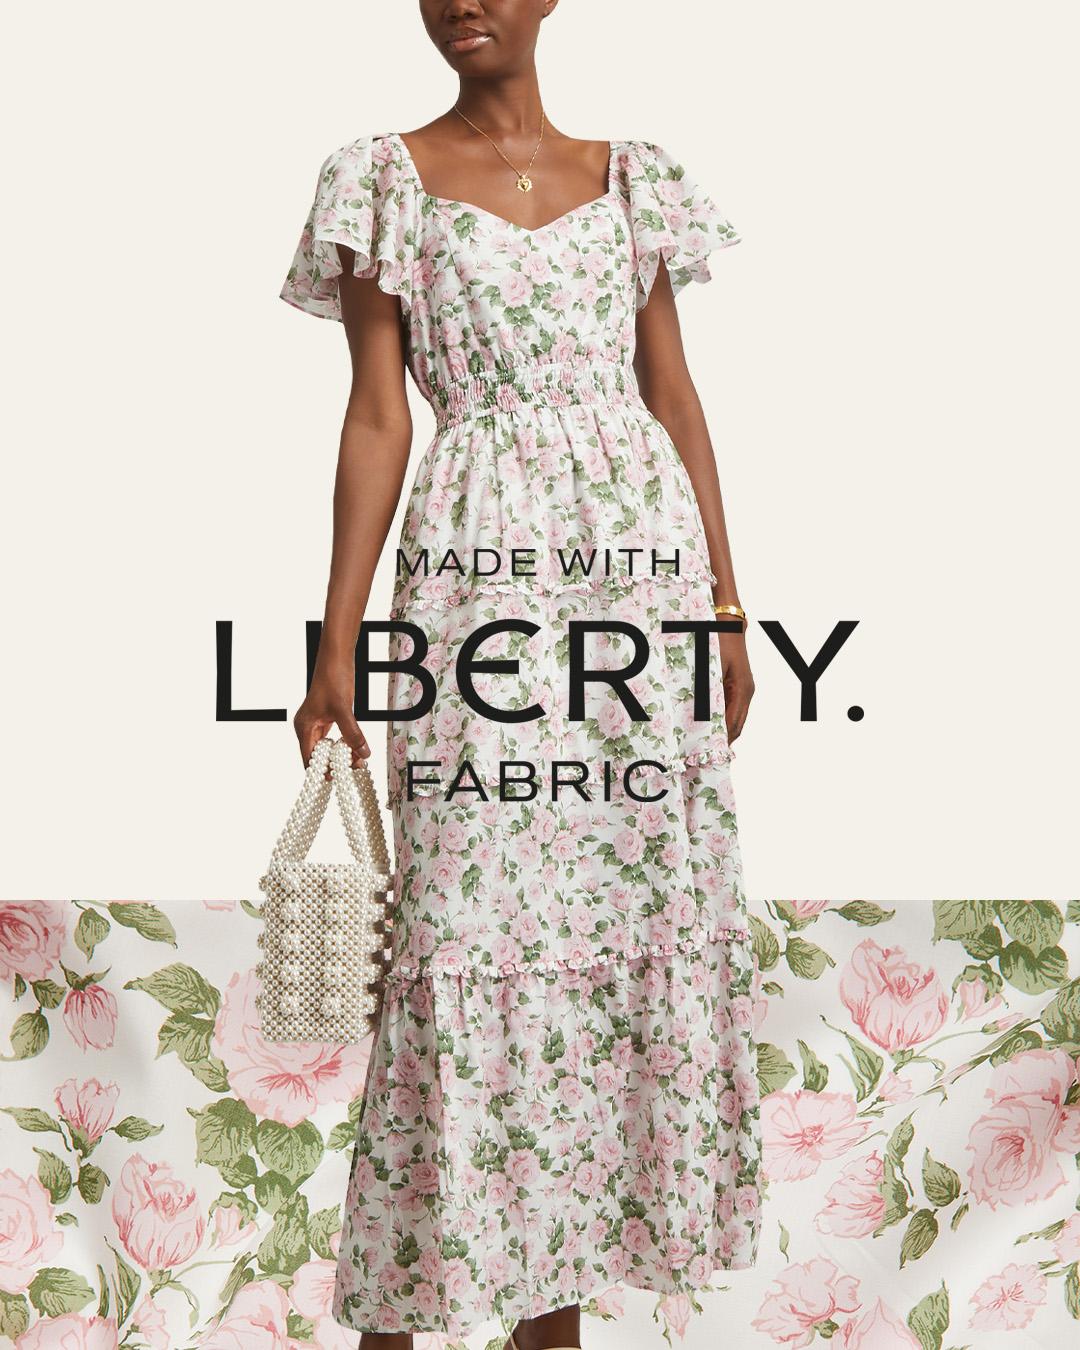 LoveShackFancy's New 'Made with Liberty Fabrics' Collection